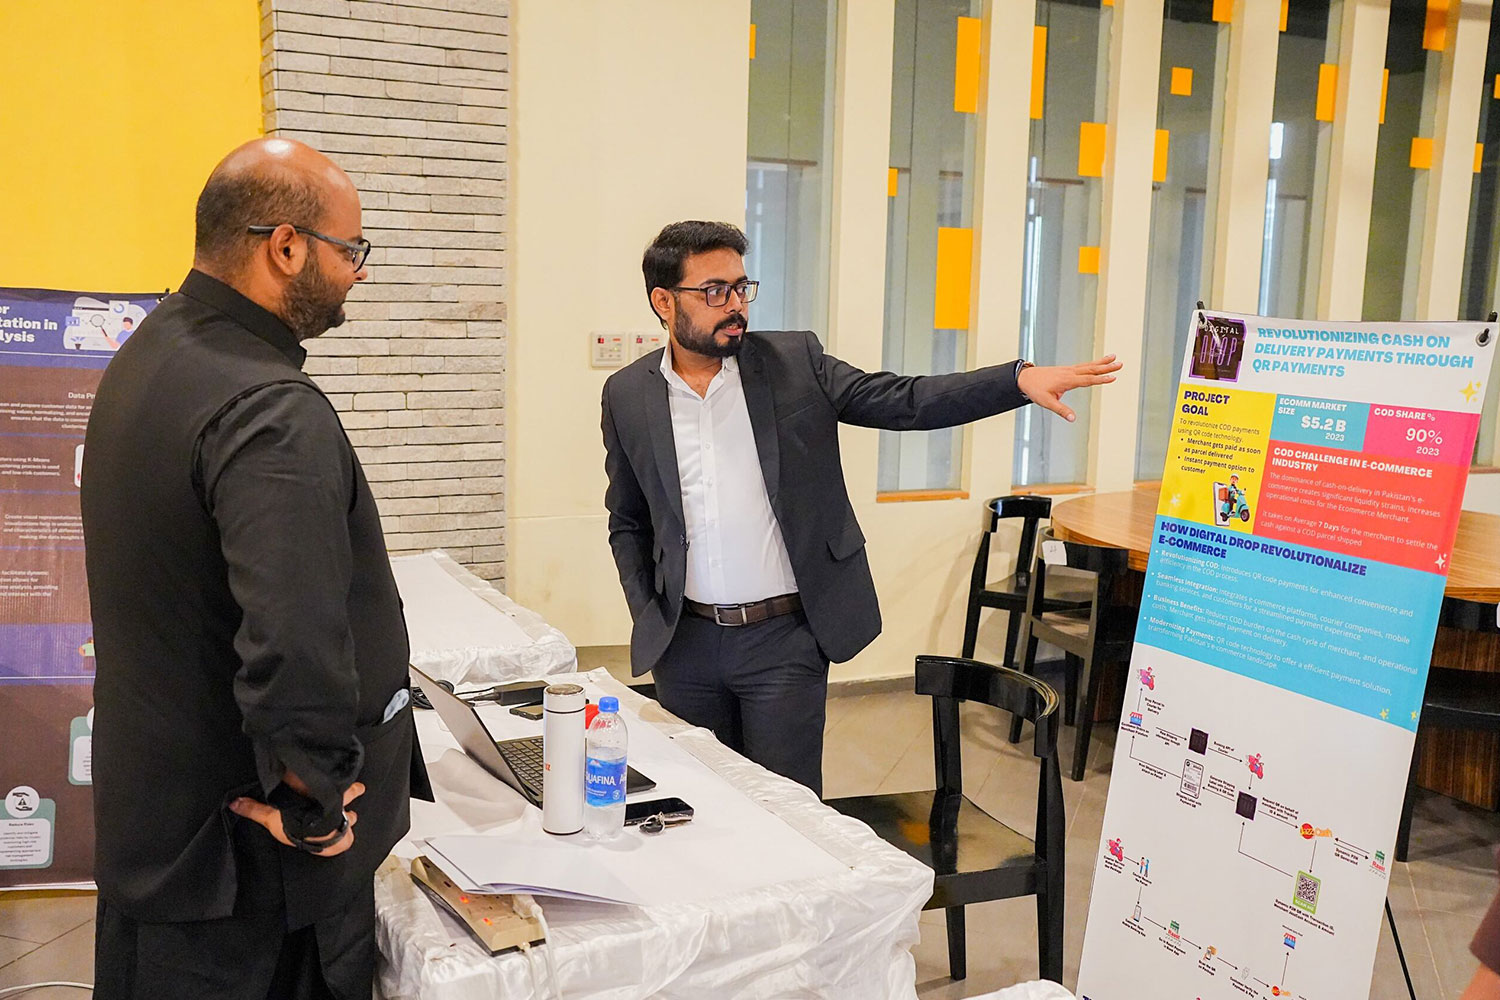 SMCS organizes MS project presentations for MSCS and MSDS programs